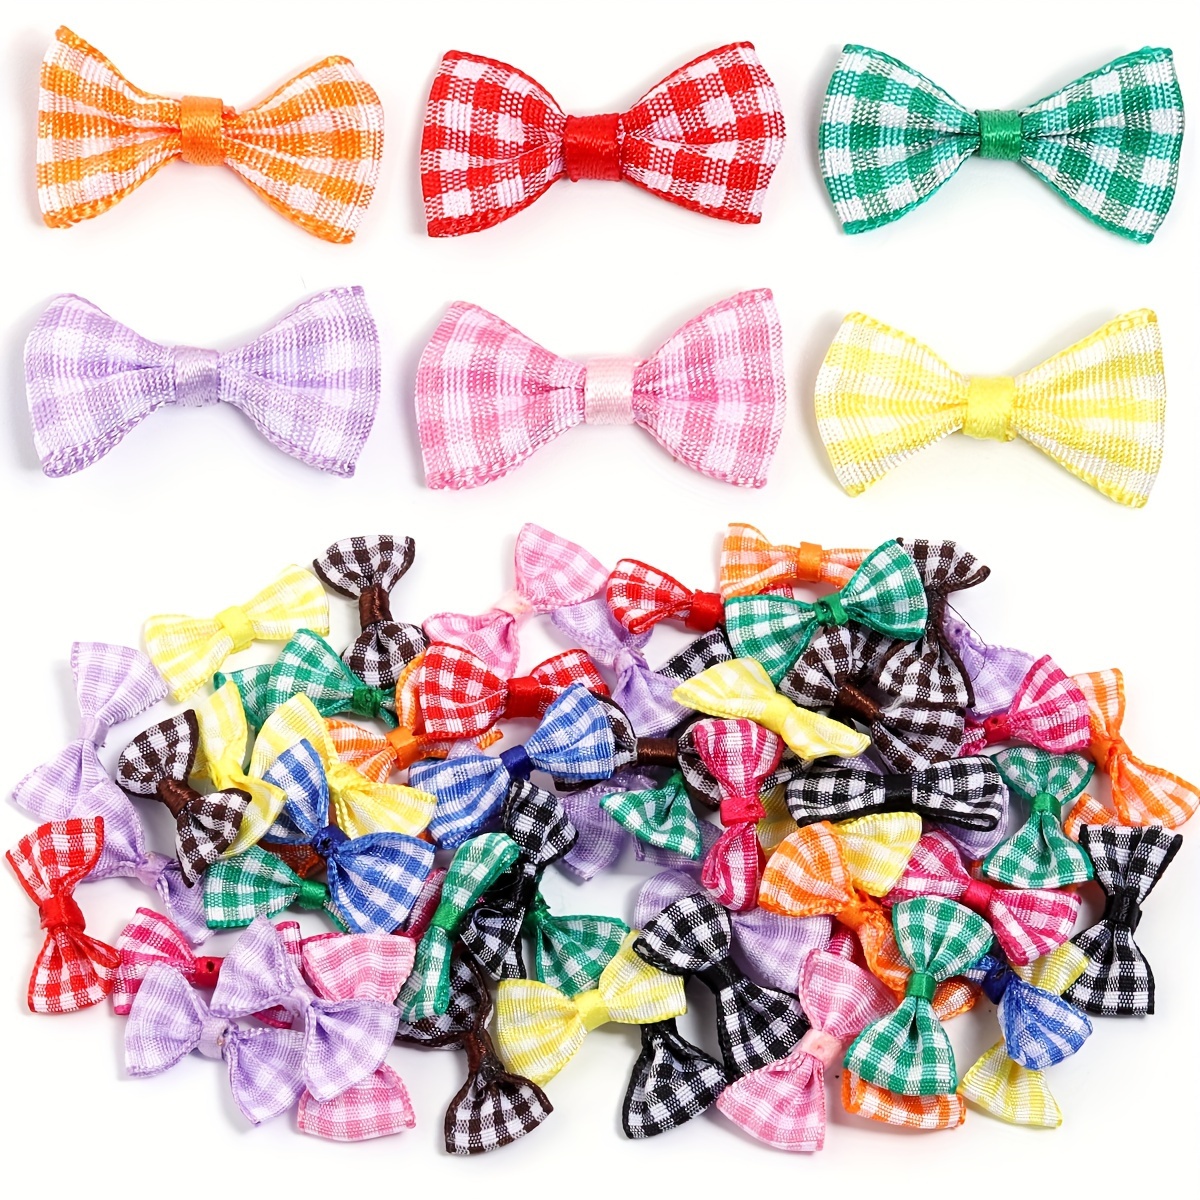 

30pcs Ribbon Plaid Hand Tie Bow Pendant Cute Bowknot Charms For Diy Hair Accessories Clothing Bow Tie Making Accessories